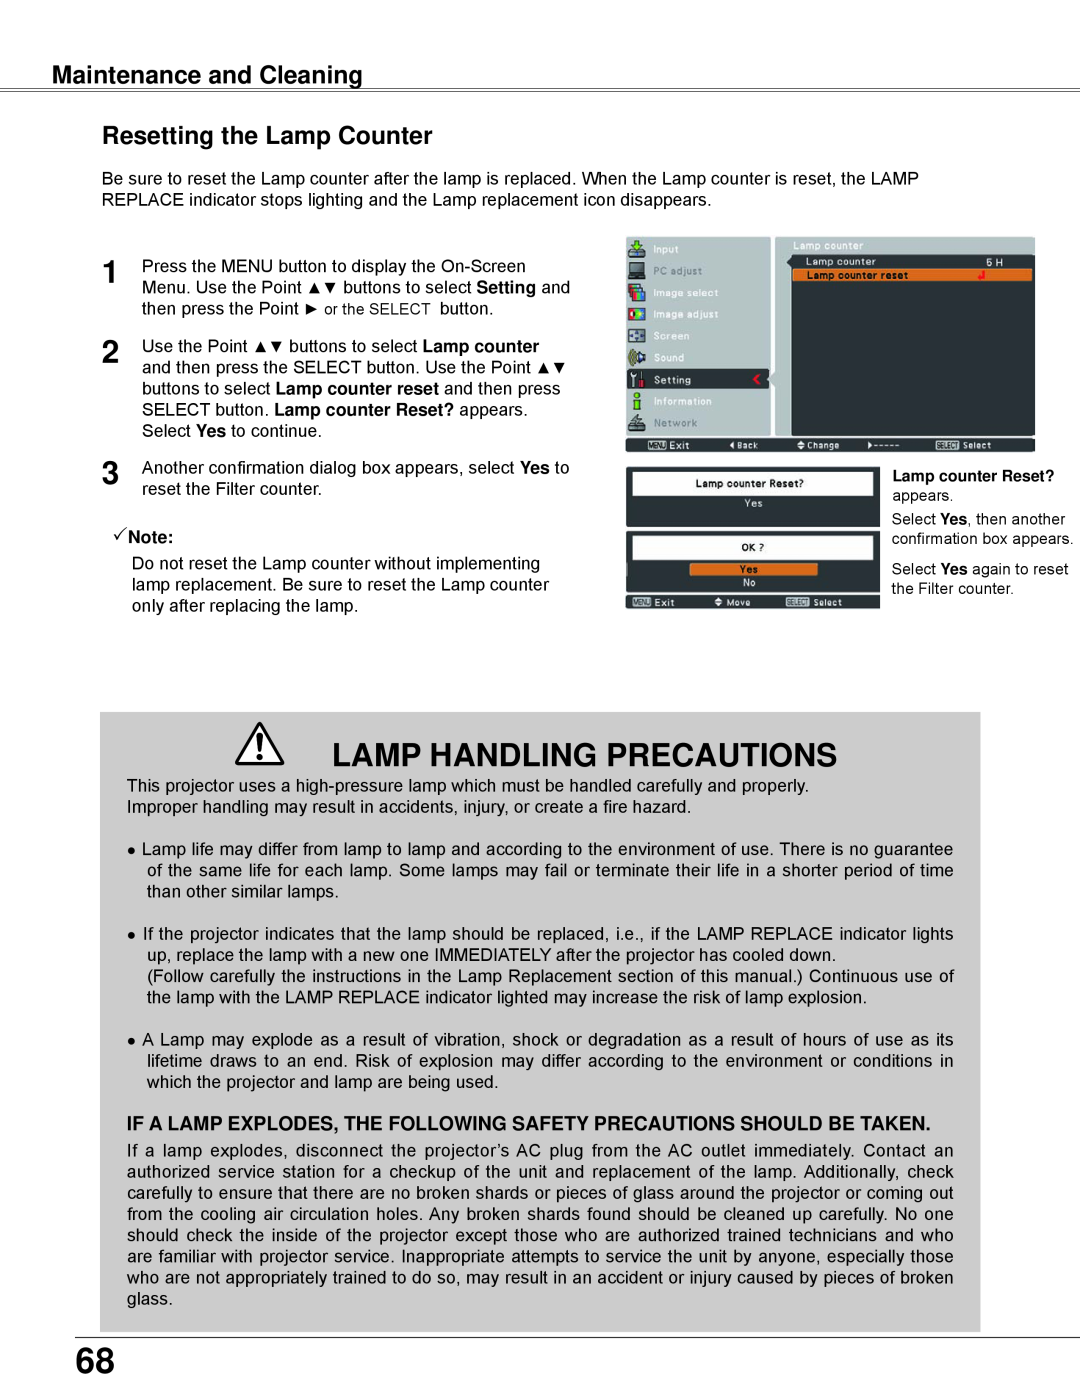 Eiki LC-WB42N owner manual Maintenance and Cleaning Resetting the Lamp Counter, Lamp Handling Precautions, Note 